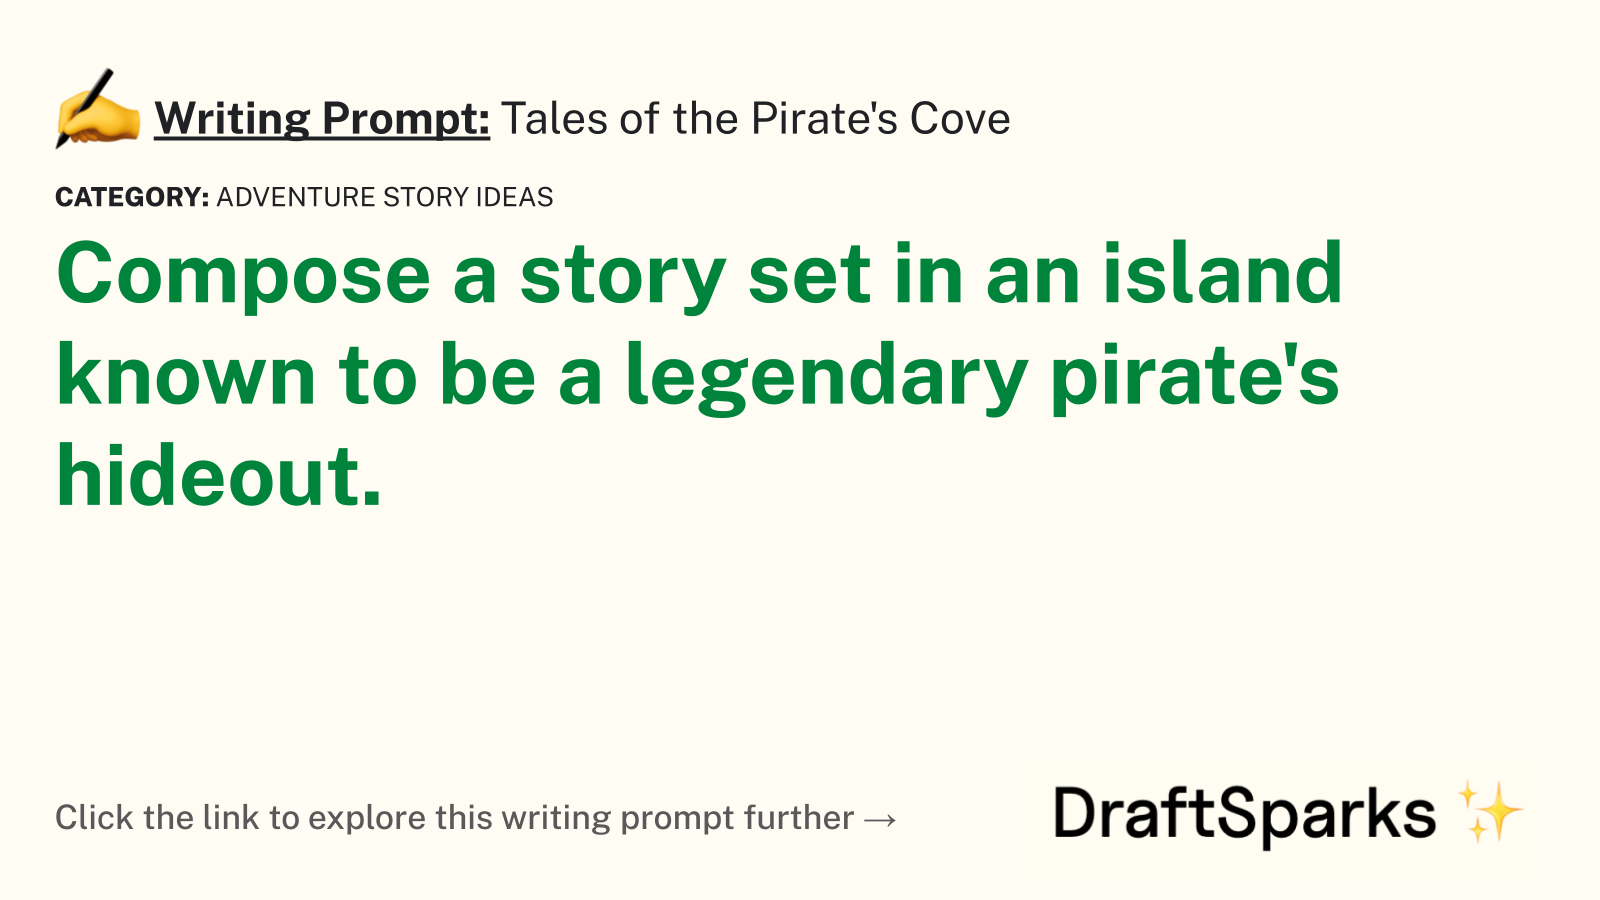 Tales of the Pirate’s Cove